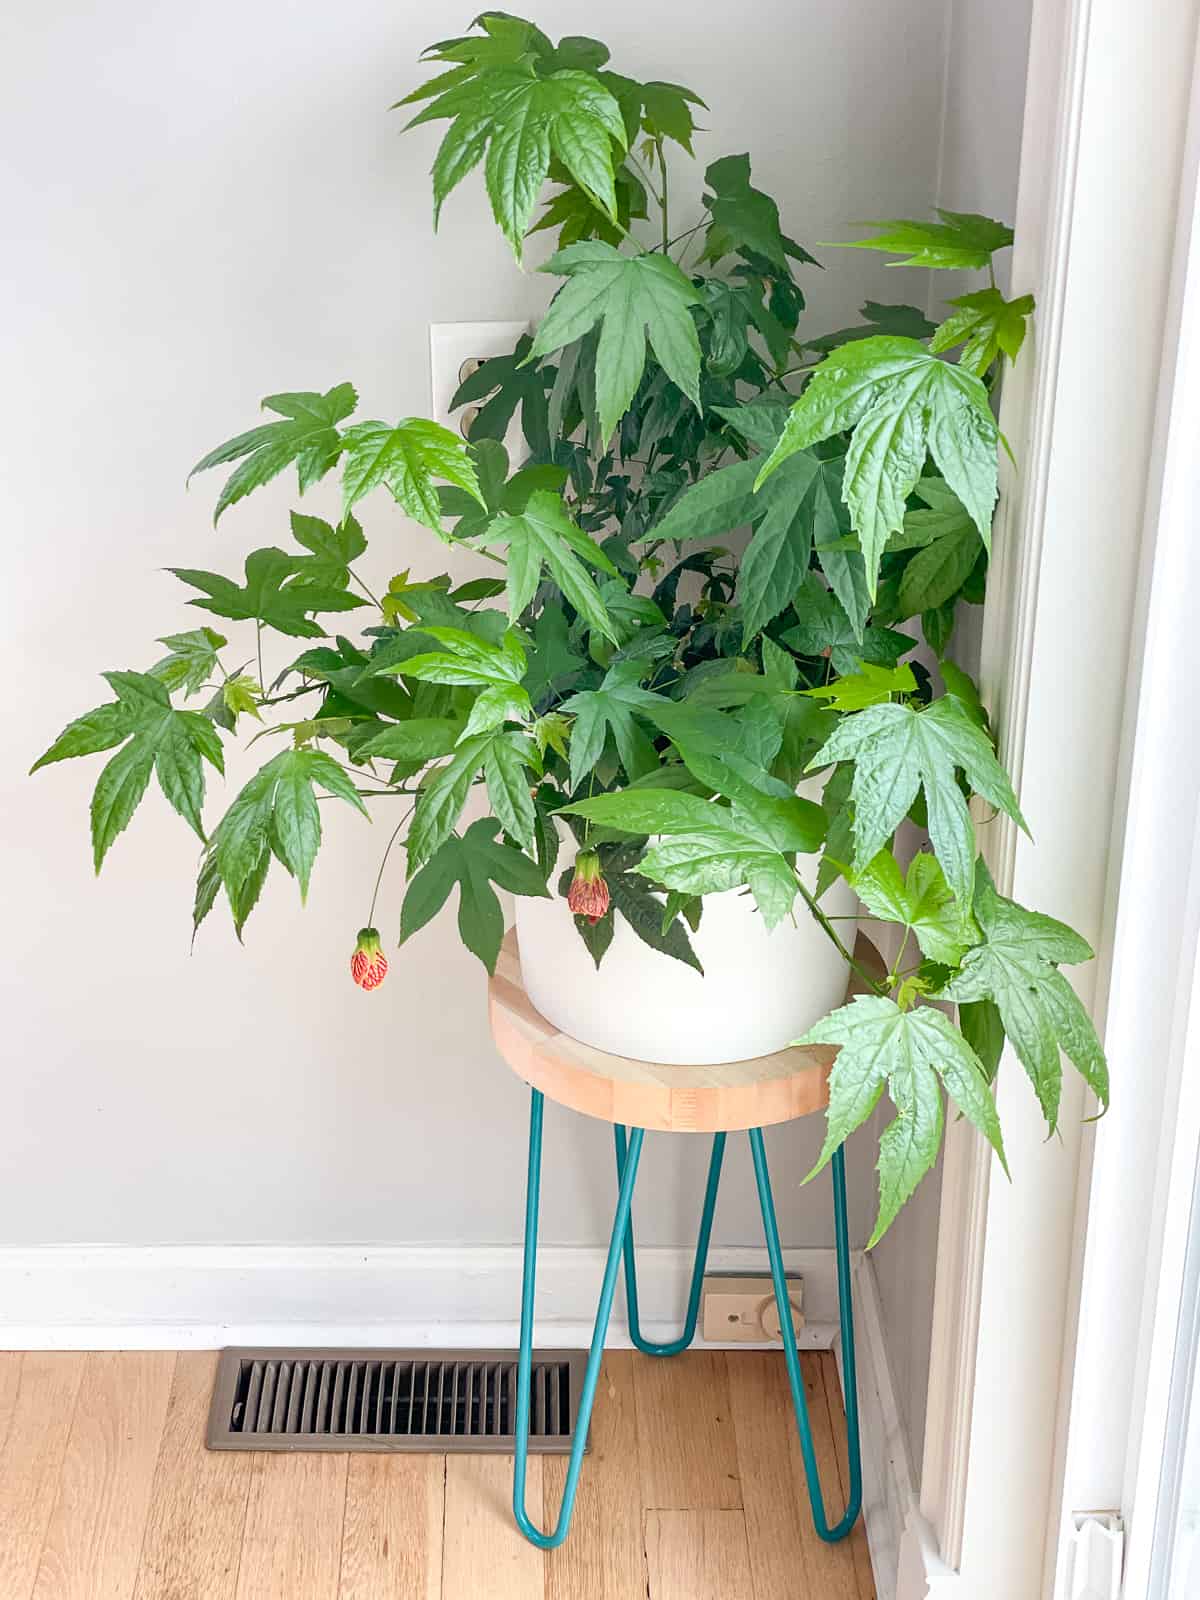 DIY hairpin leg plant stand in corner with heat vent and outlet visible